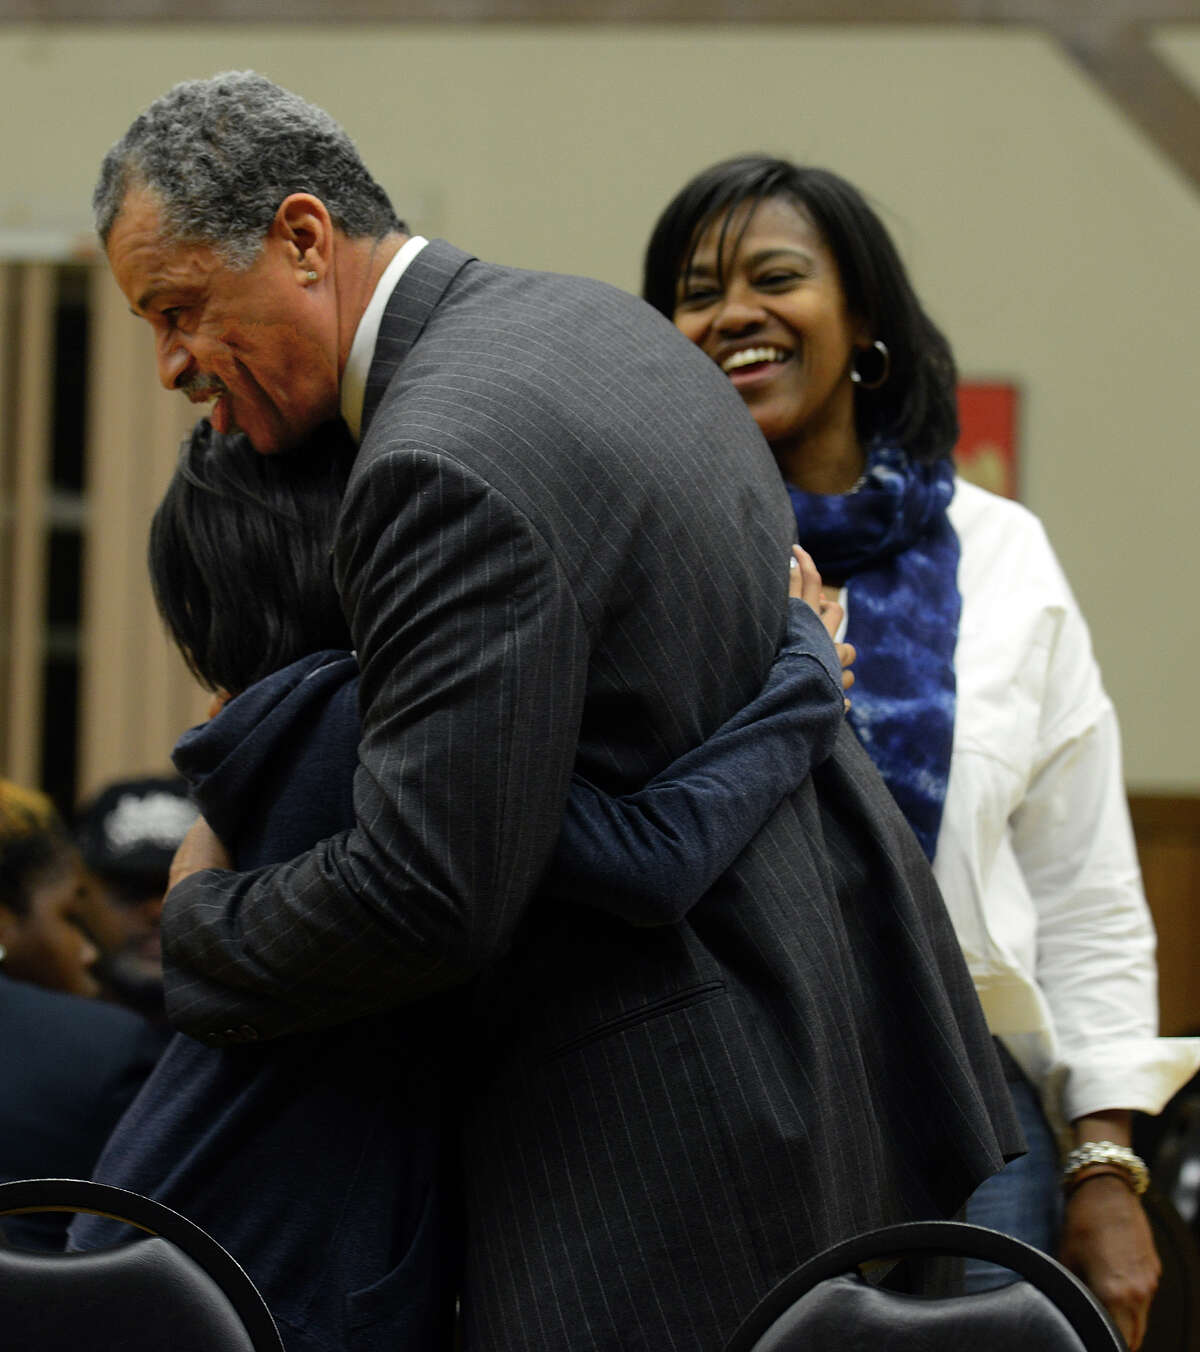 Bridgeport Mayoral candidate David Daniels hugs Jordan Whichard, 12, as mom Gina looks on, during a fundraiser for Daniels at the Germania Schwaben Club in Bridgeport, Conn., on Thursday October 22, 2015.